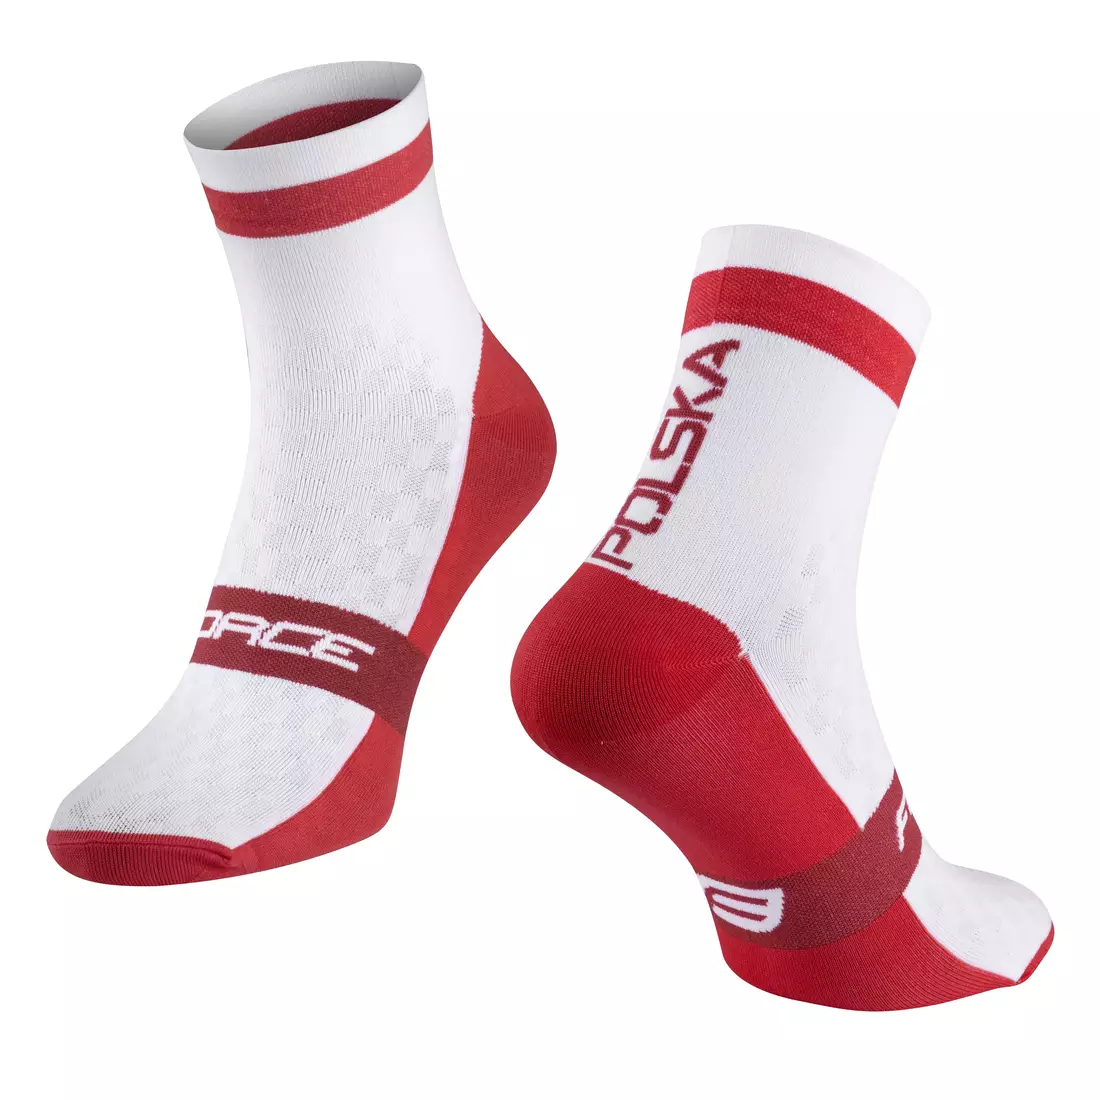 FORCE cycling socks FLAG POLAND red/white 9009026